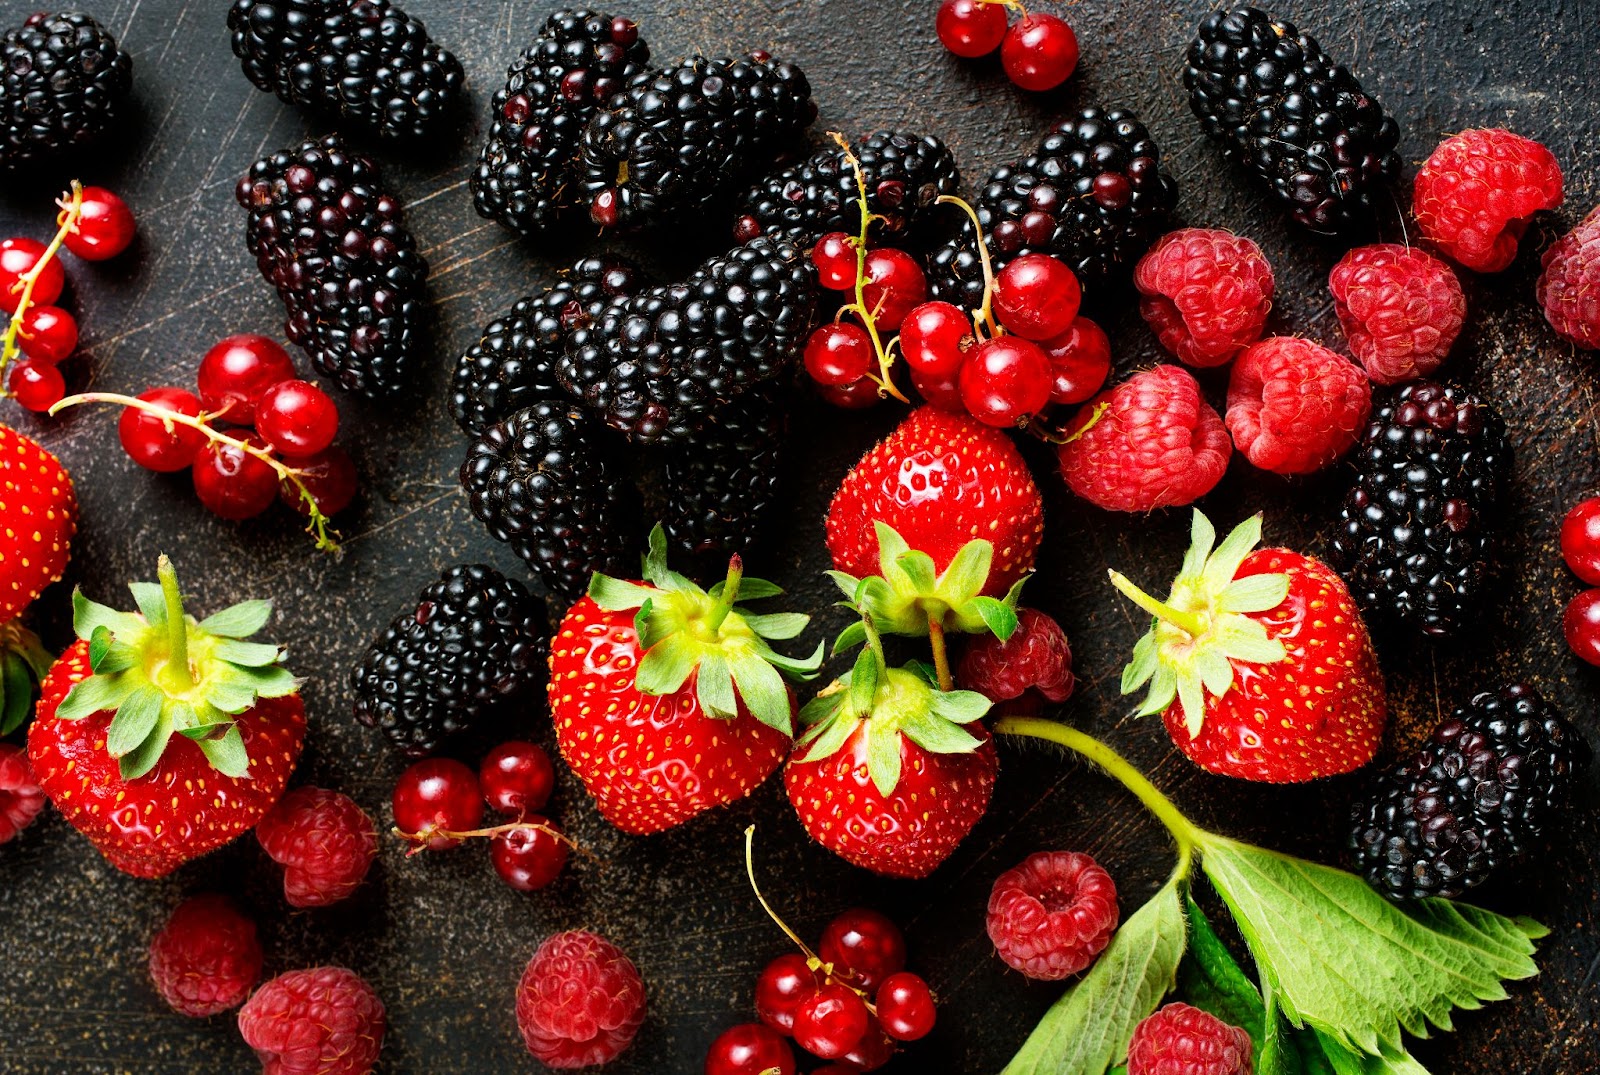 <p>Berries, such as strawberries, raspberries, and blackberries, are not only a delightful and colorful treat, but they are also nutritional powerhouses for anti-aging. Brimming with antioxidants, vitamins, and fiber, these tiny fruits offer a wide range of health benefits.</p> <p>Regular consumption of berries has been linked to a reduced risk of heart disease, improved brain function, and decreased inflammation. Their high antioxidant content helps protect the body against oxidative stress, a key contributor to aging. Enjoy these versatile fruits fresh, blended into smoothies, or as a topping for yogurt and oatmeal for a delicious and nutritious boost to your day.</p>